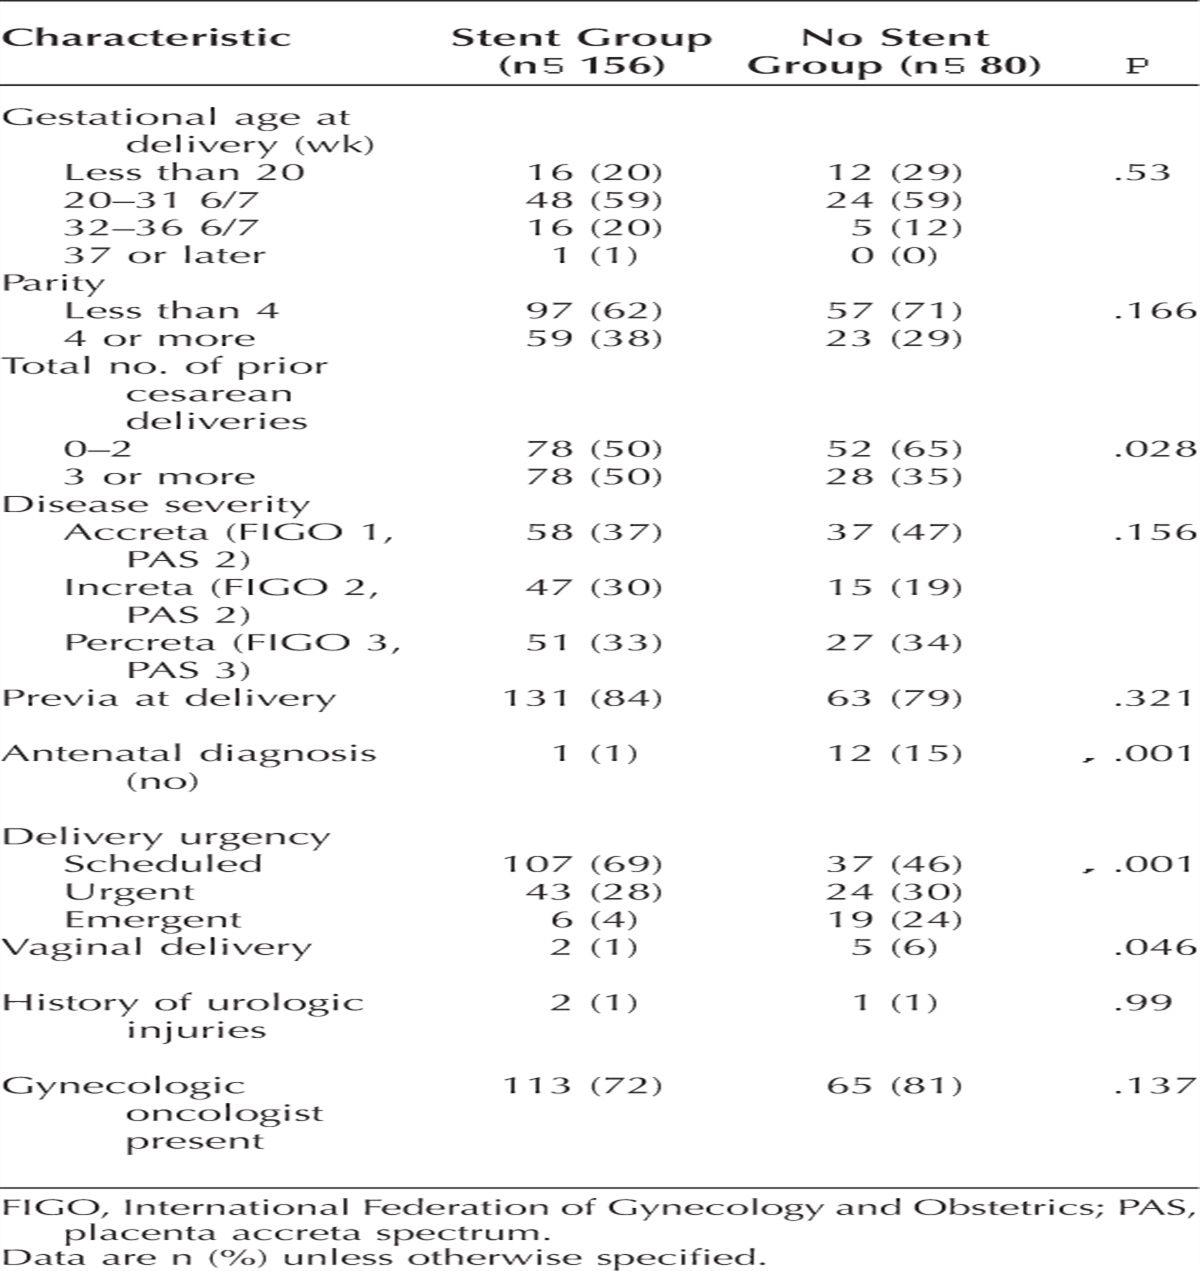 Prophylactic Ureteral Stent Placement and Urinary Injury During Hysterectomy for Placenta Accreta Spectrum